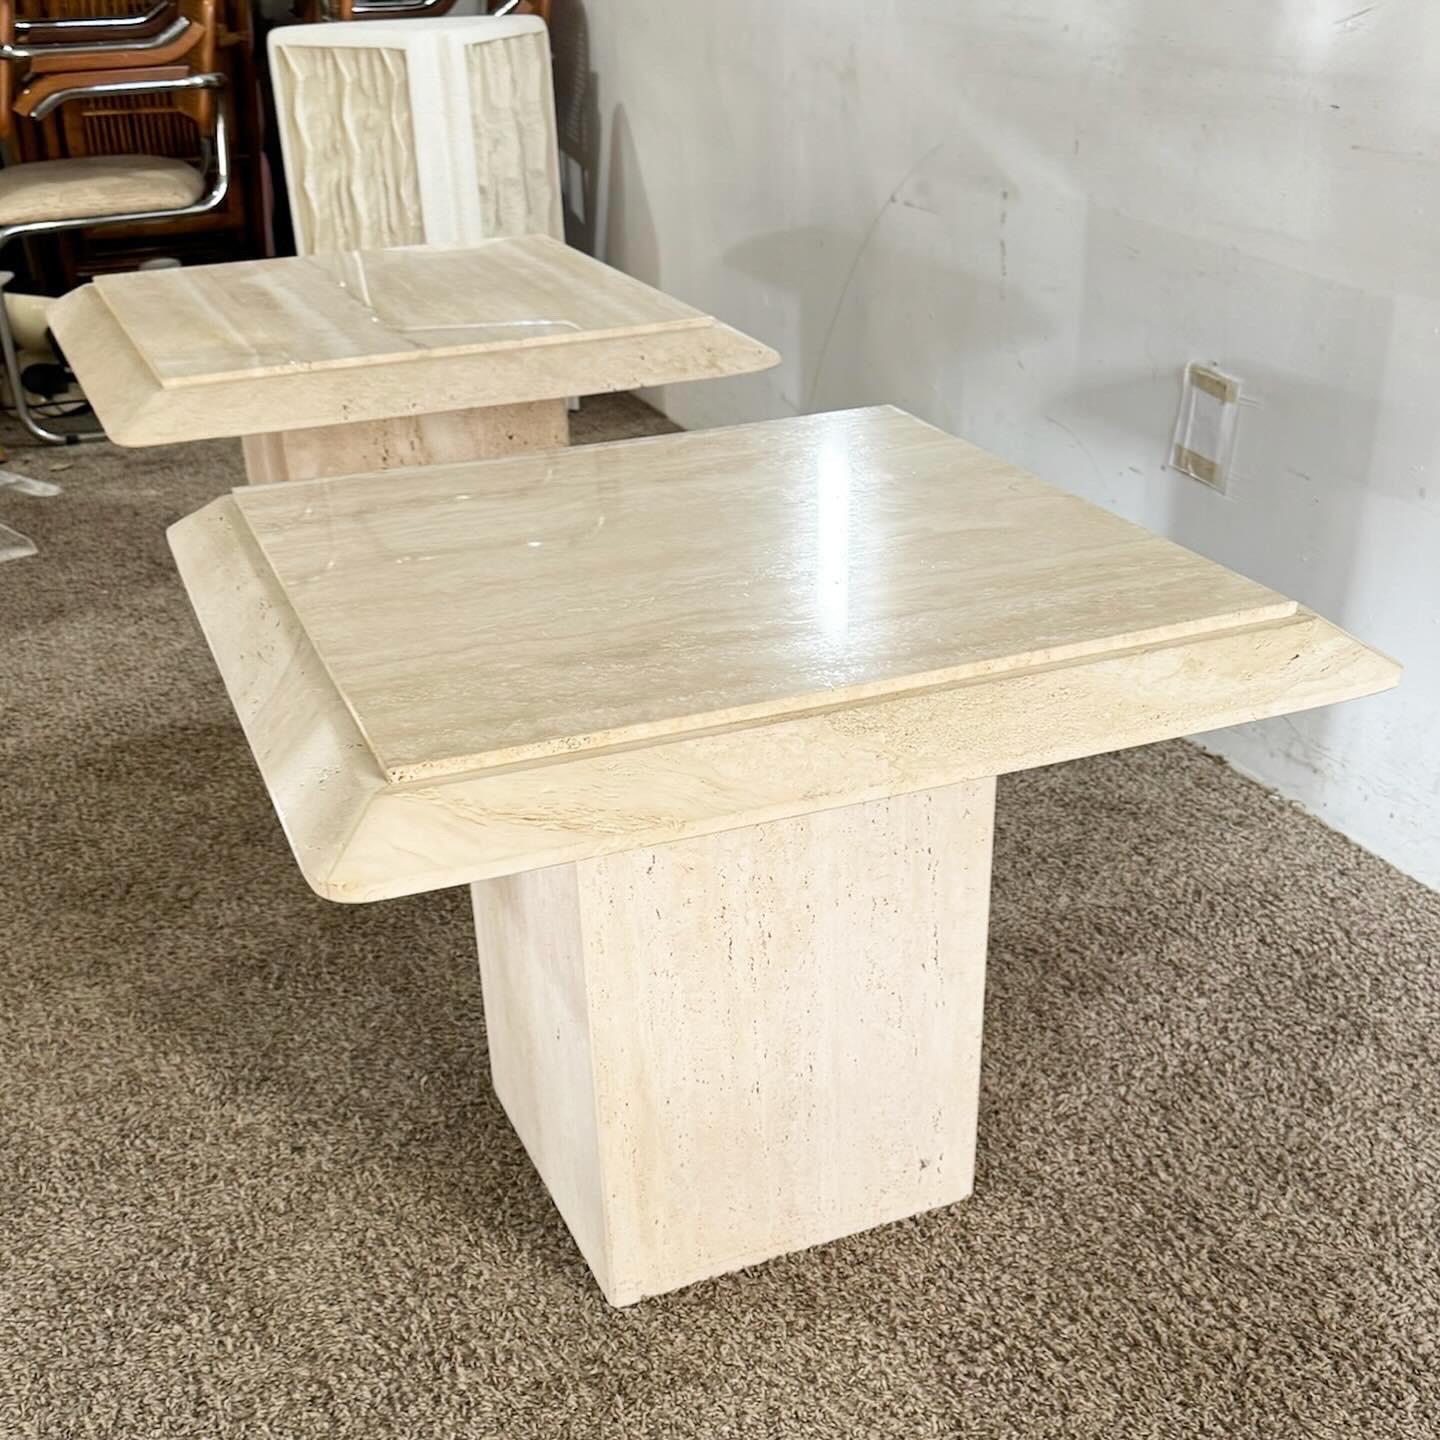 Post-Modern Italian Travertine Square Beveled Top Side Tables – a Pair For Sale